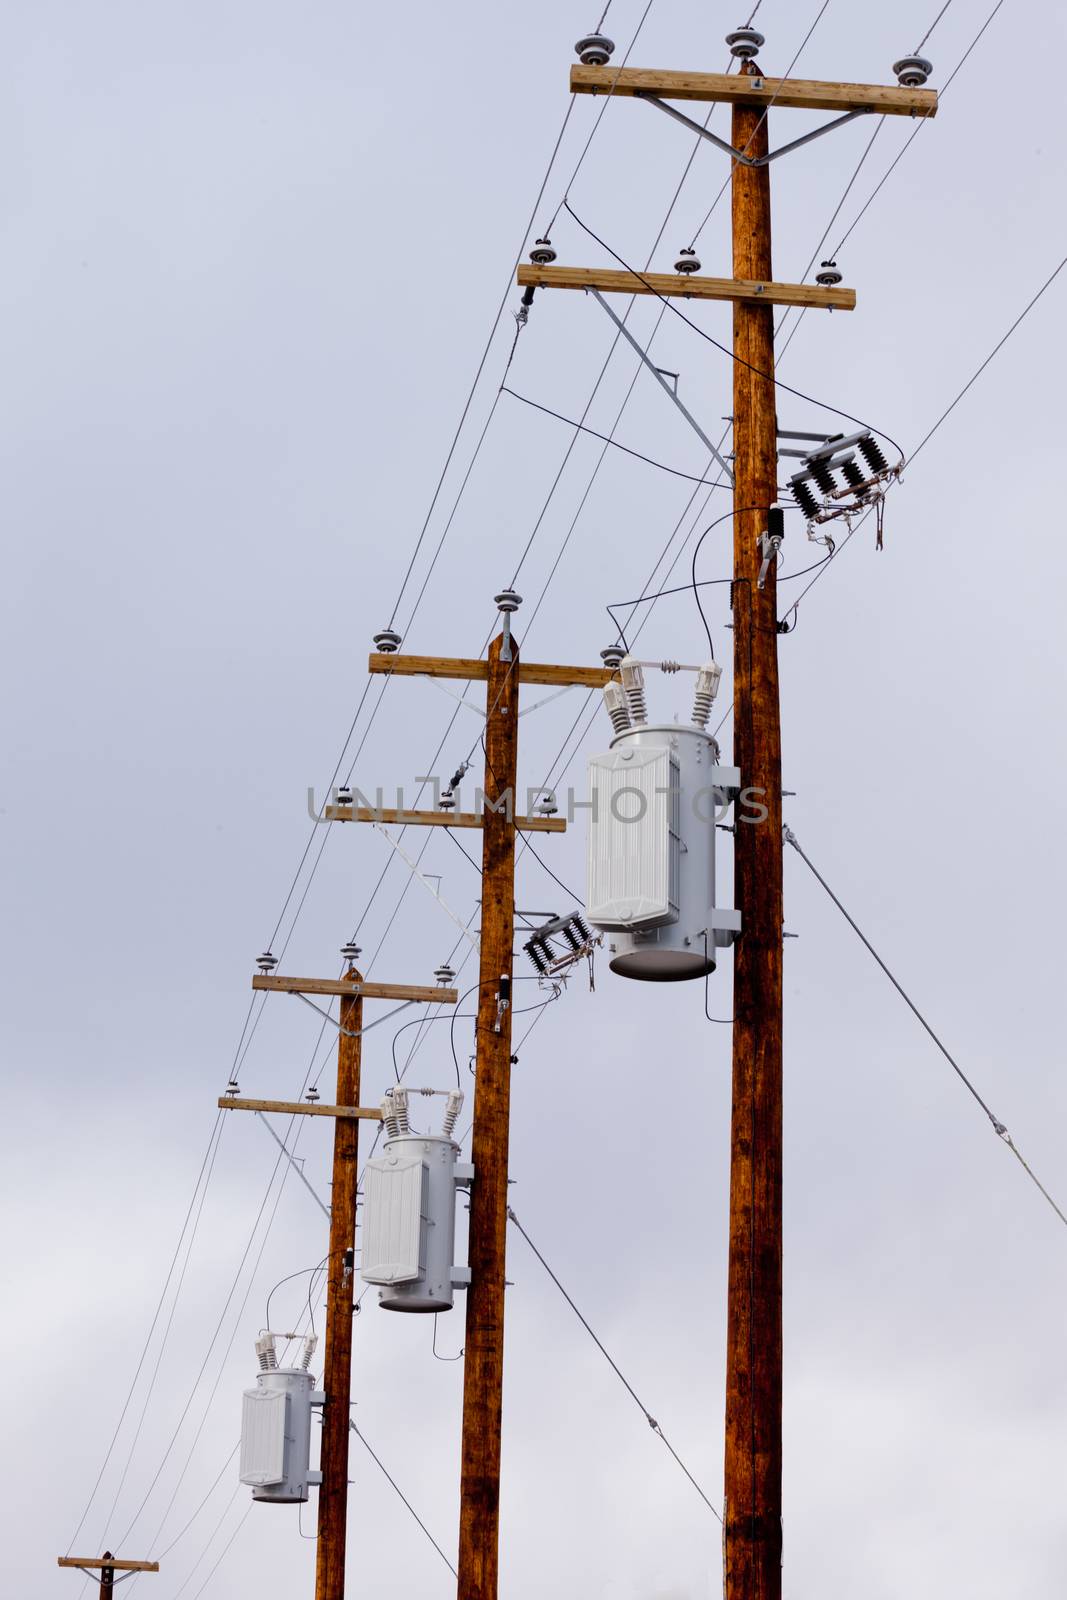 Row of utility poles power cables and transformers by PiLens